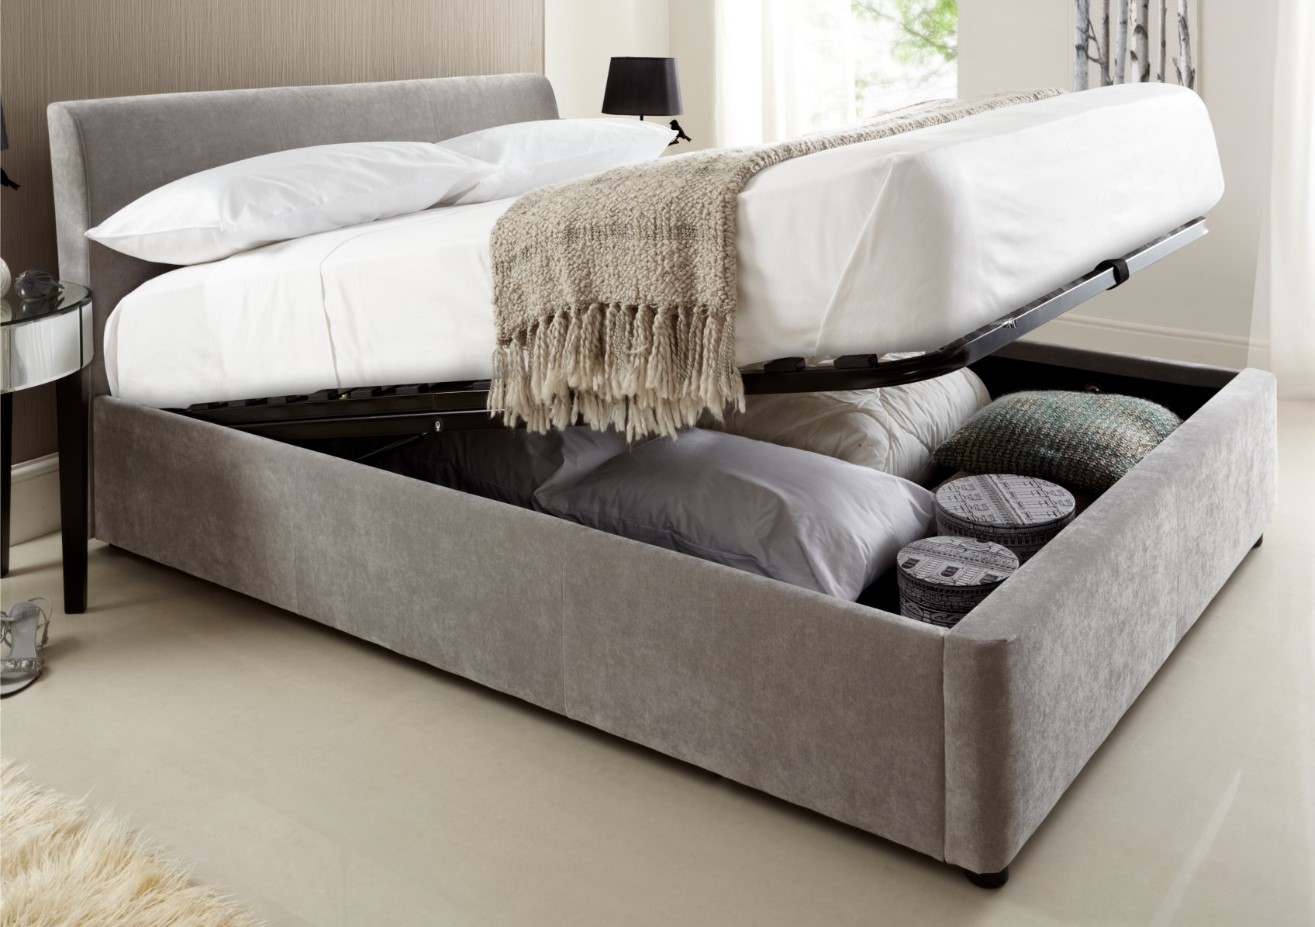 Bed Frame Shopping Guide – Finding the Perfect Storage Bed